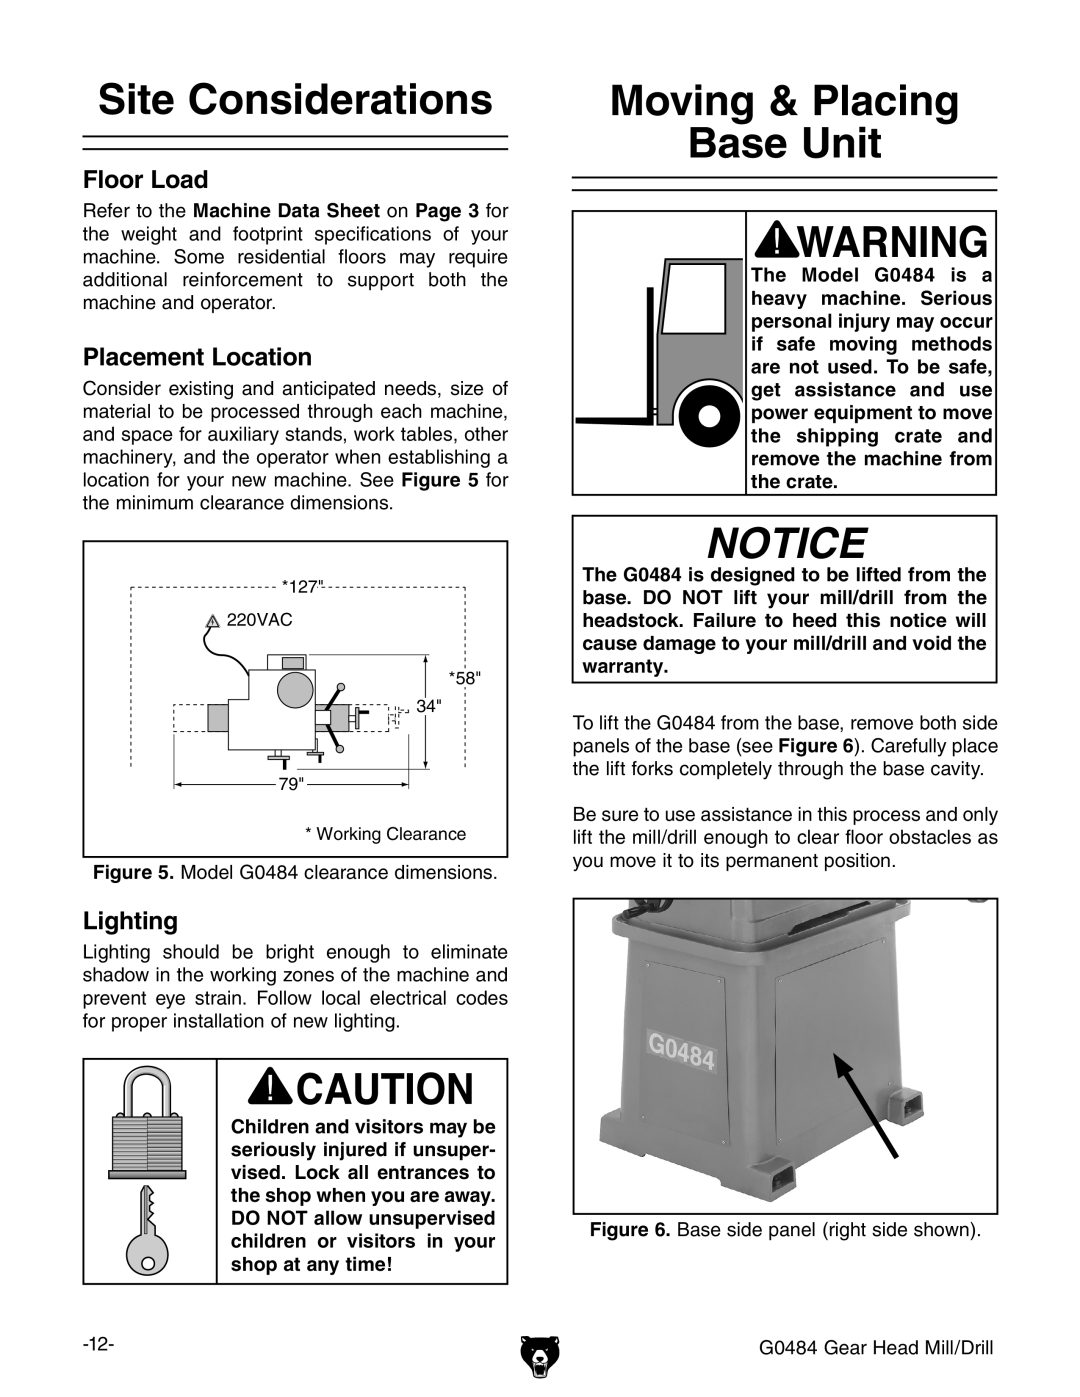 Grizzly G0484 owner manual Site Considerations, Moving & Placing Base Unit, Floor Load, Placement Location, Lighting 